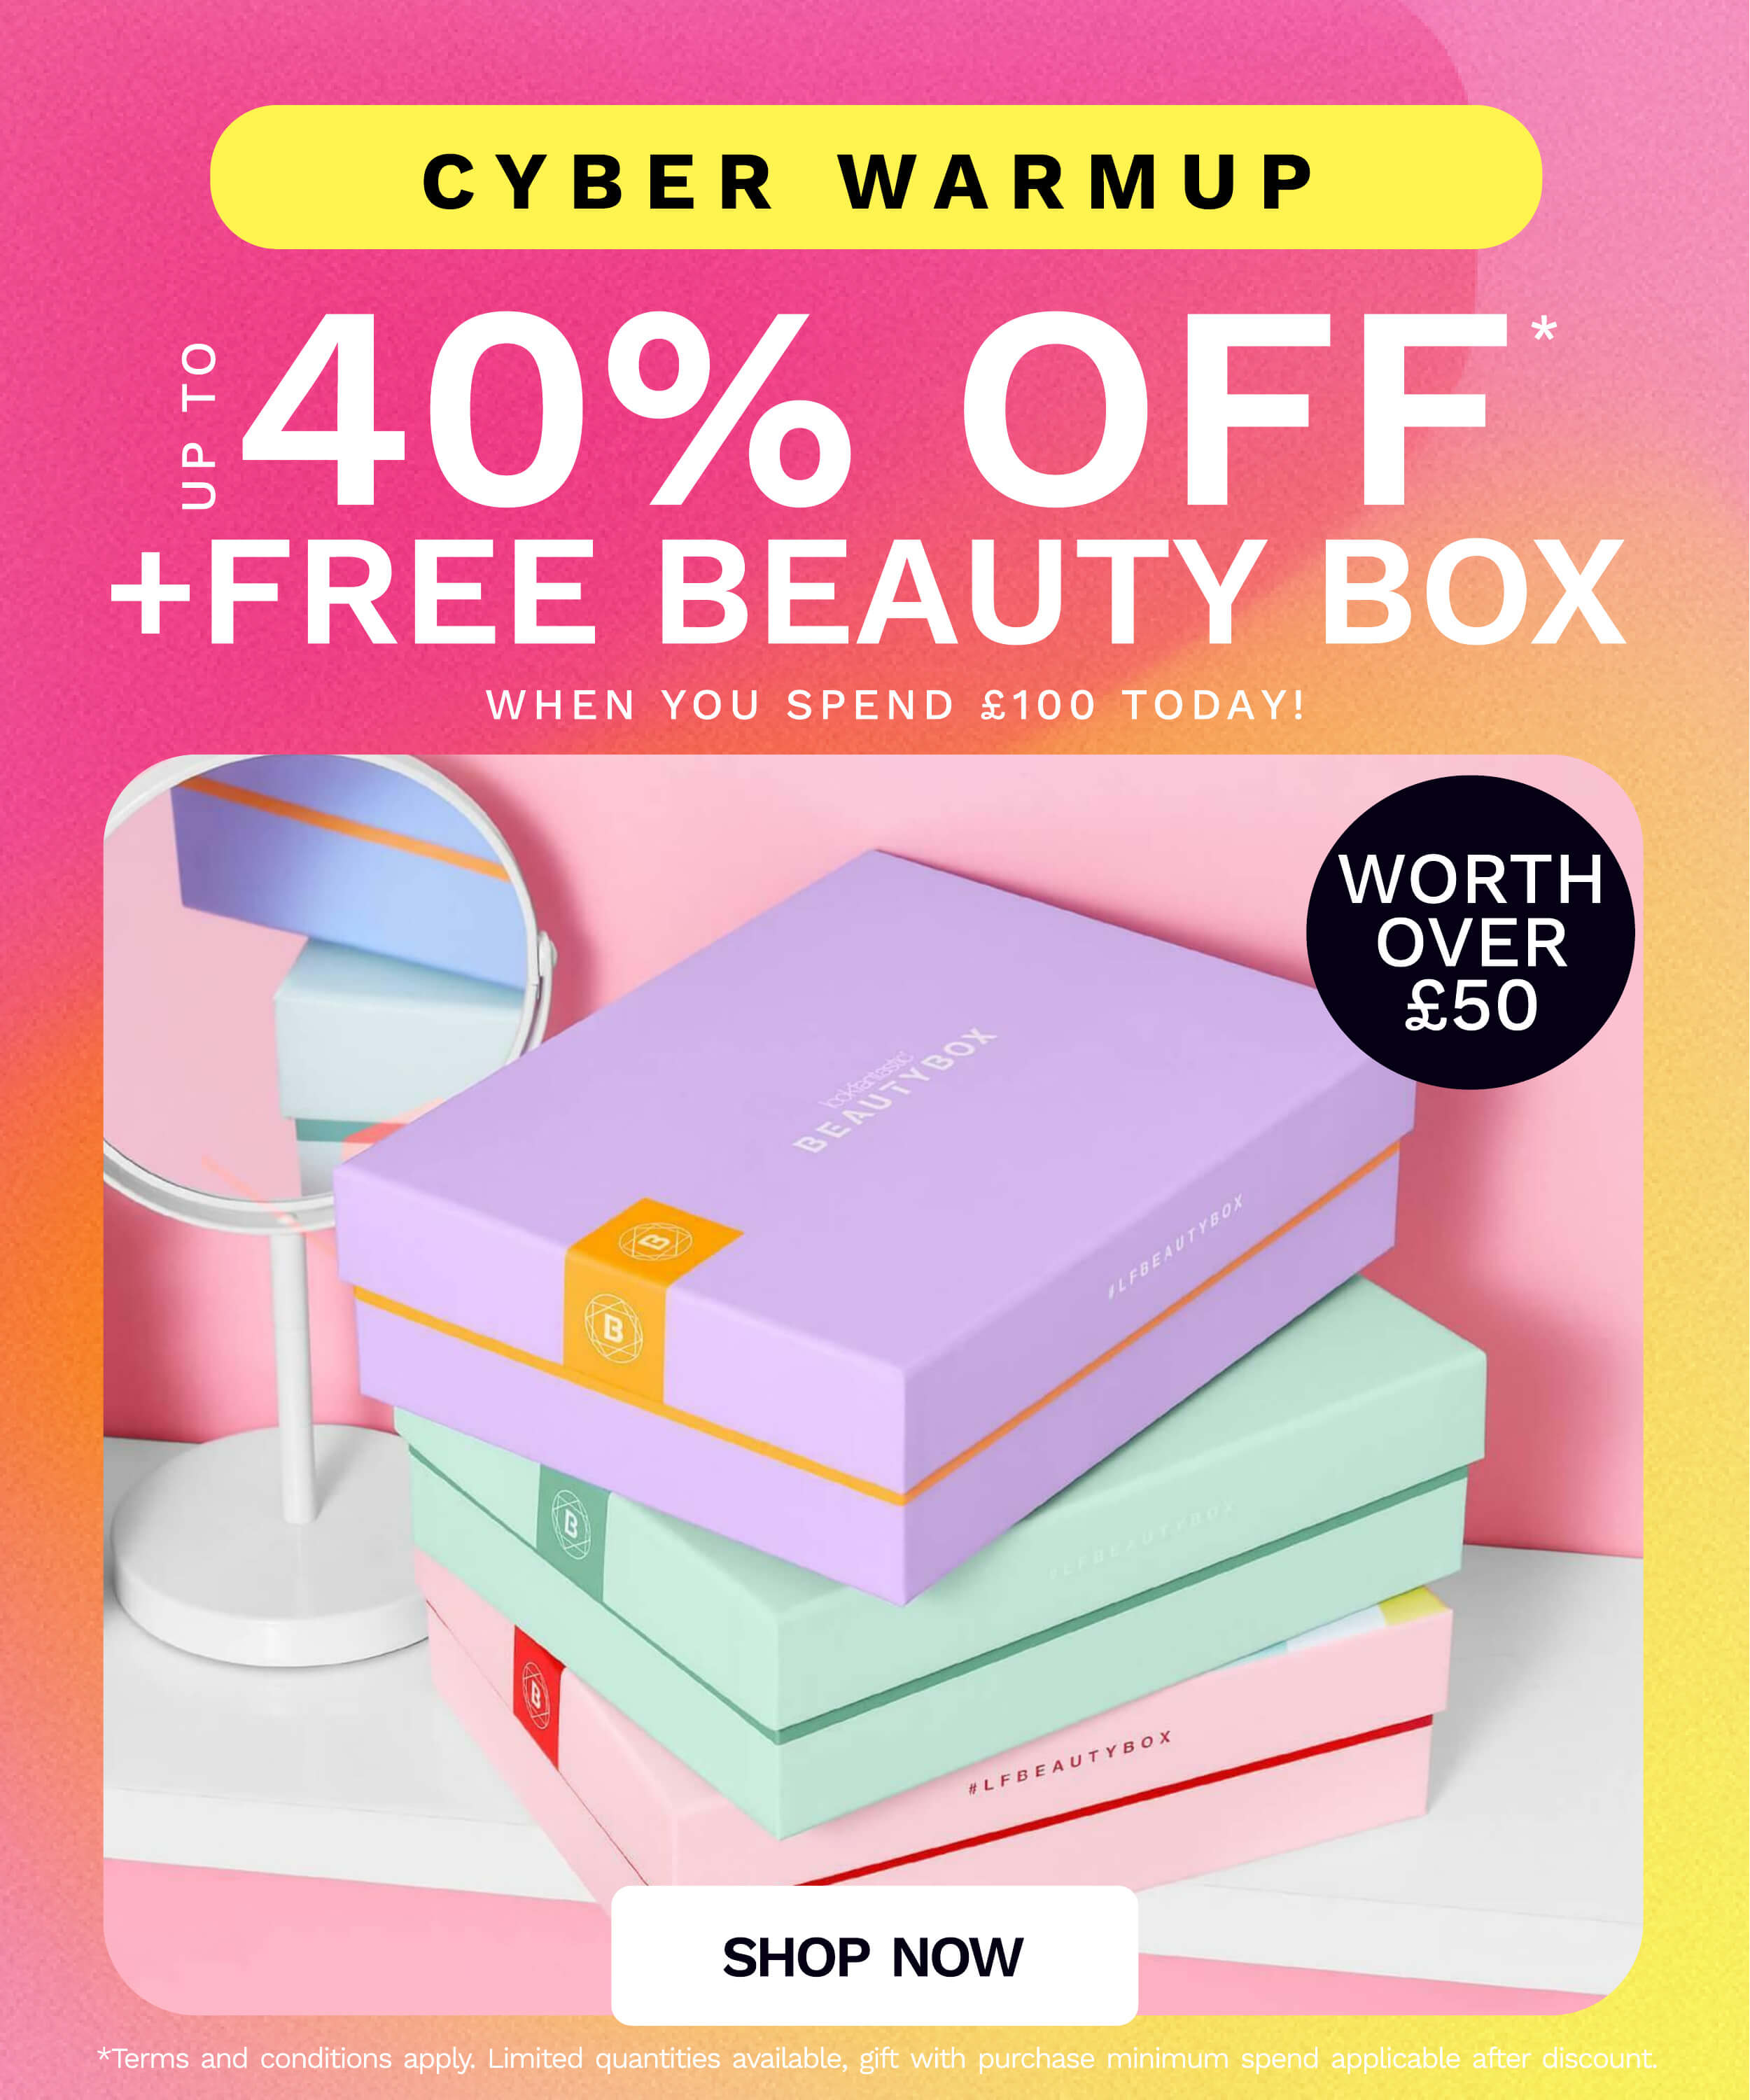 Up to 40 percent off plus FREE BEAUTY BOX